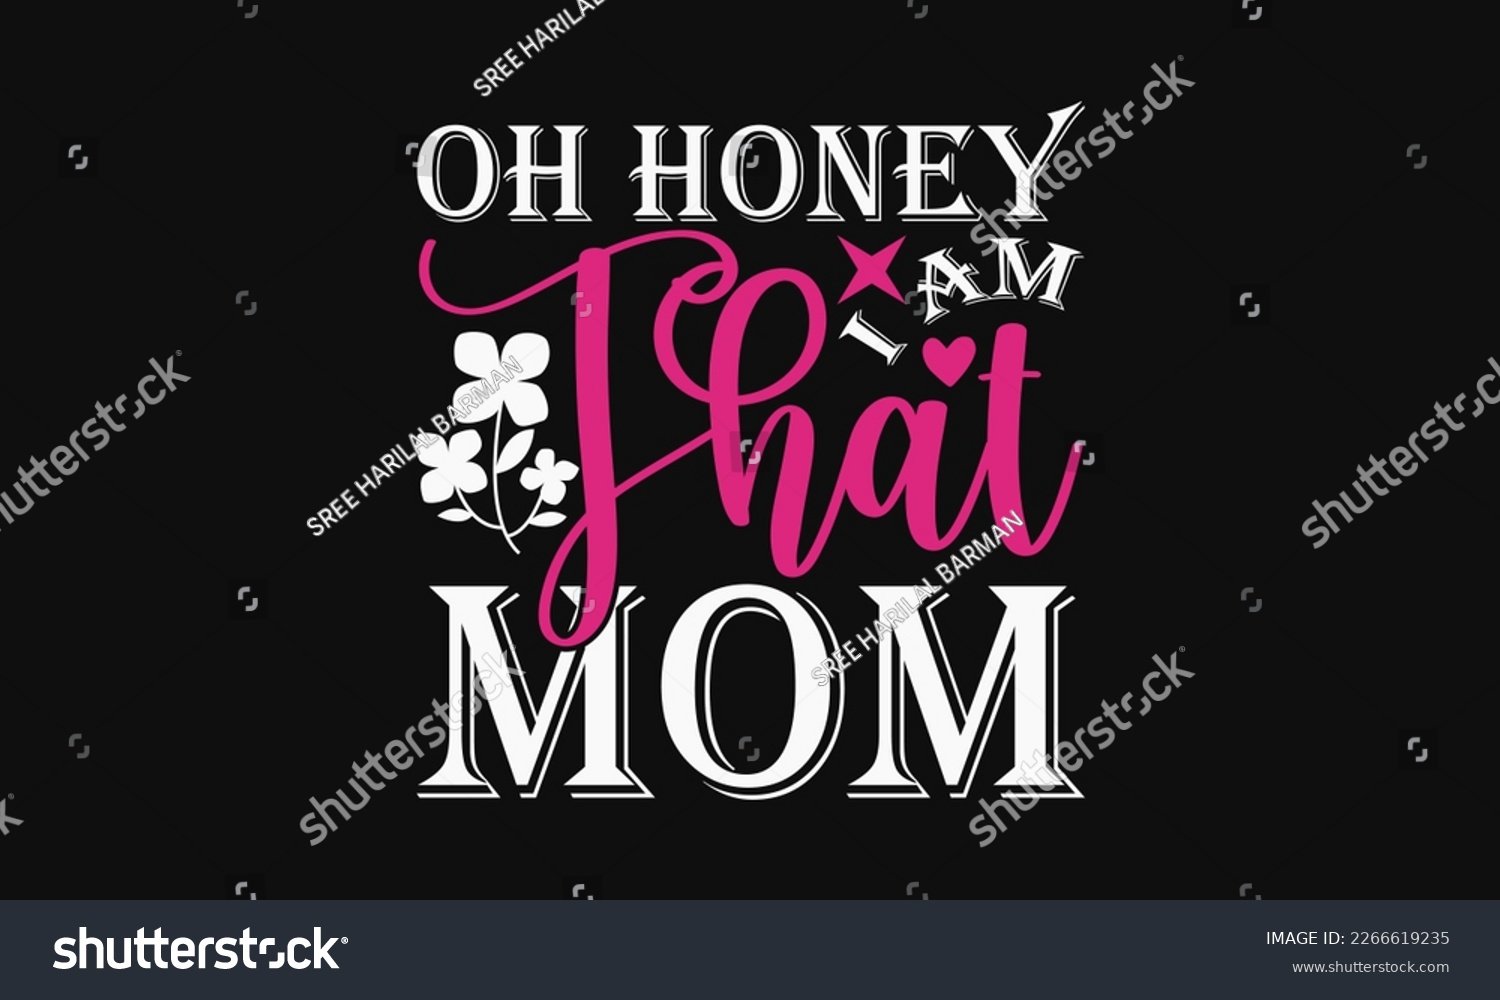 SVG of Oh honey I am that mom - Mother's Day Svg t-shirt design. Hand Drawn Lettering Phrases, Calligraphy T-Shirt Design, Ornate Background, Handwritten Vector, EPS 10. svg